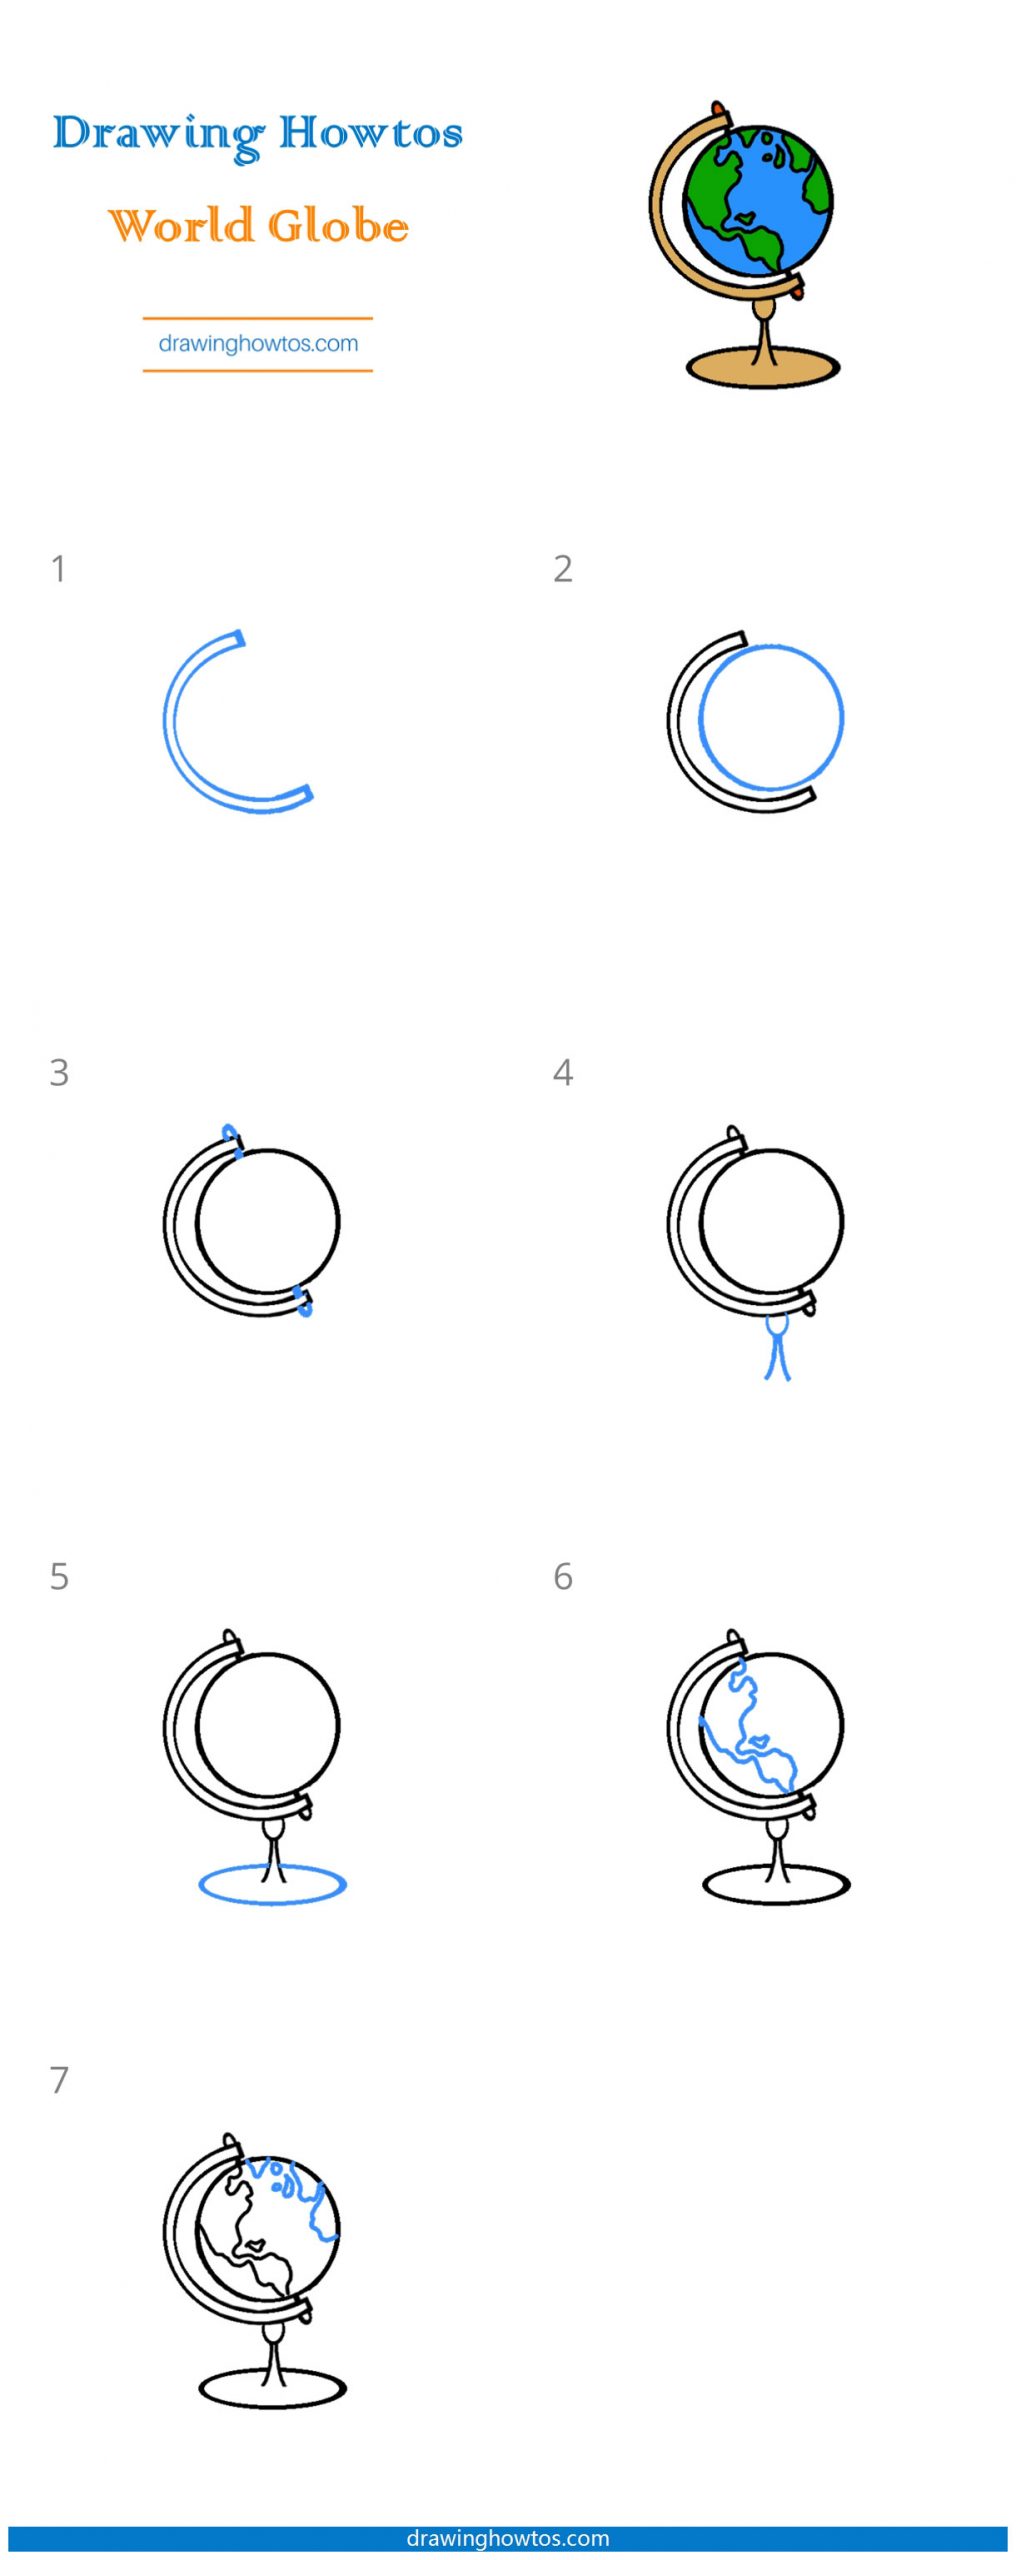 How to Draw a World Globe Step by Step